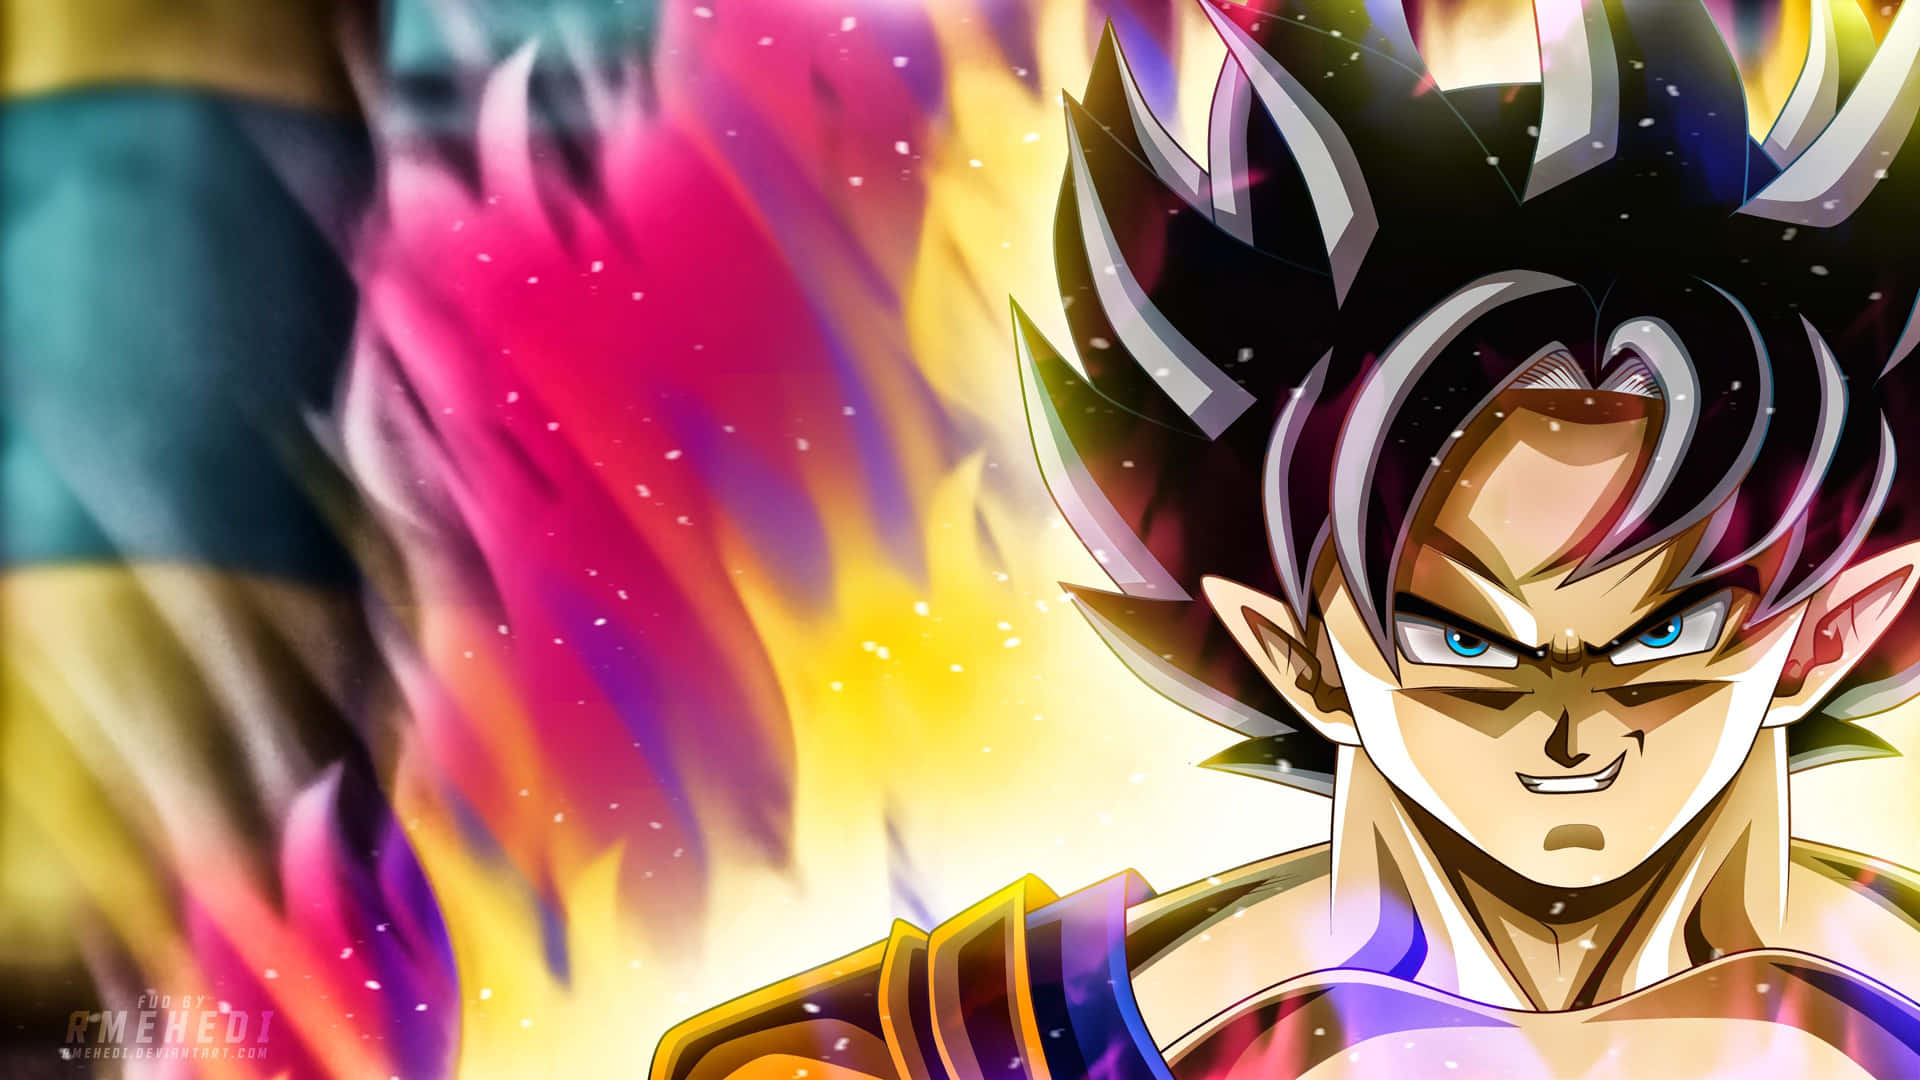 Download Level Up With the 4K Dragon Ball Z PC Wallpaper